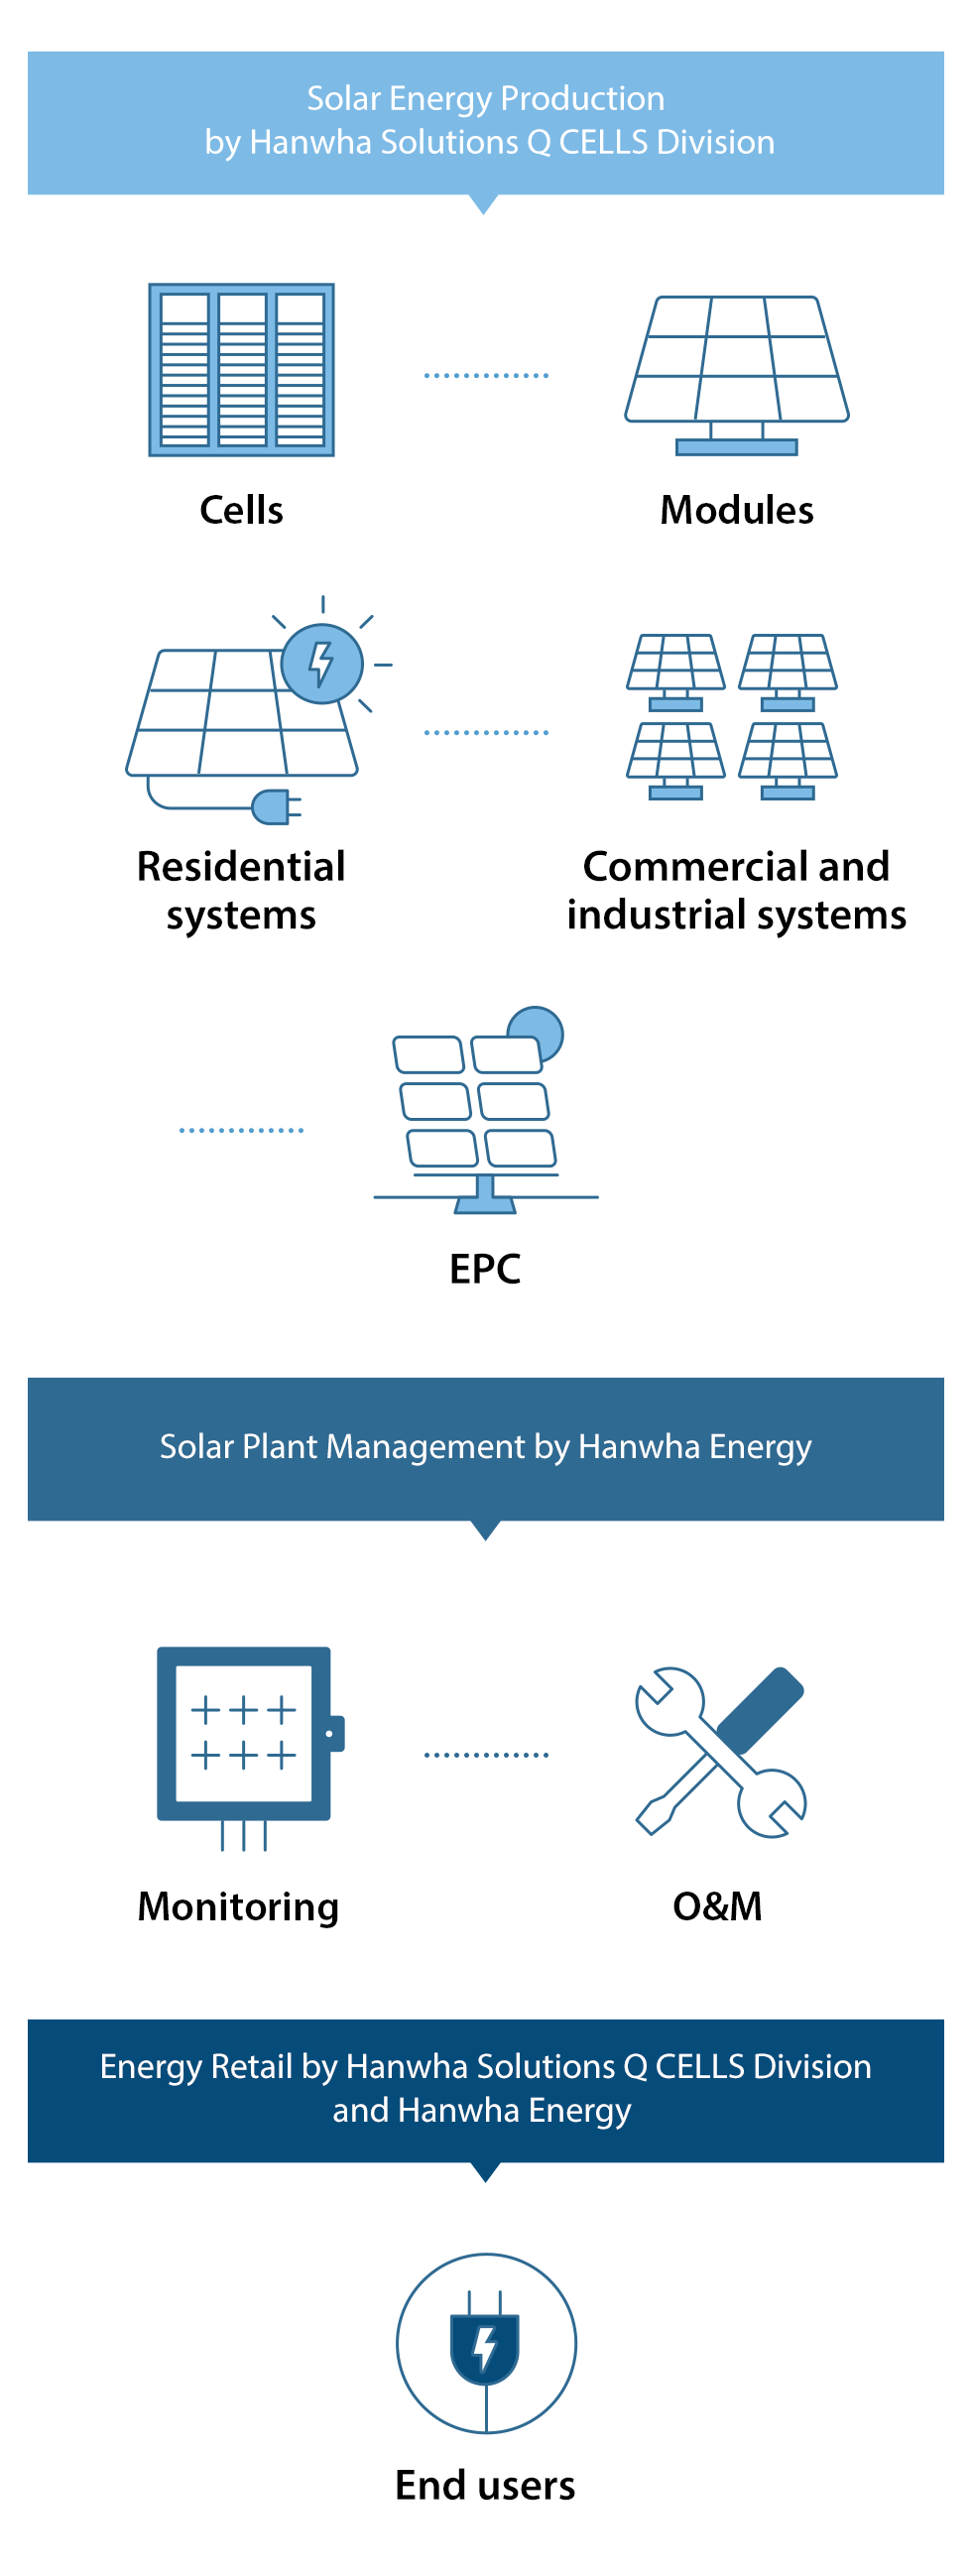 To ensure renewable energy is available for all kinds of uses, multiple Hanwha businesses have united in an energy value chain.